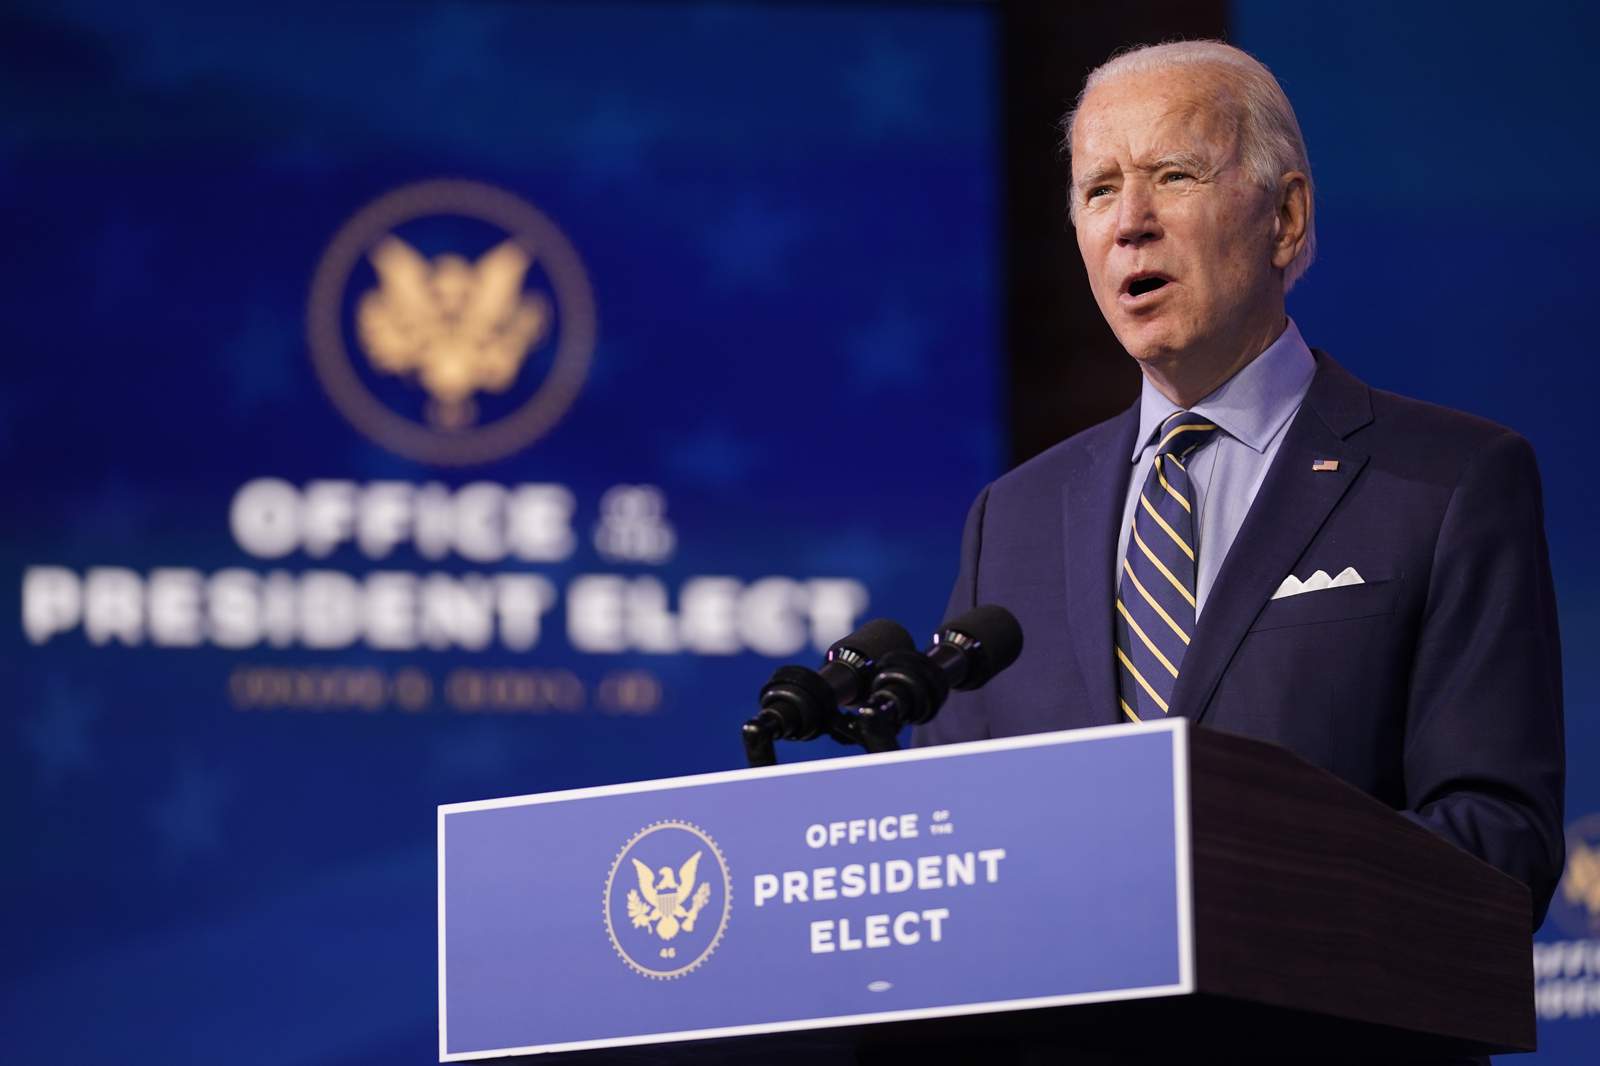 WATCH: President-elect Biden to give remarks on COVID-19 pandemic